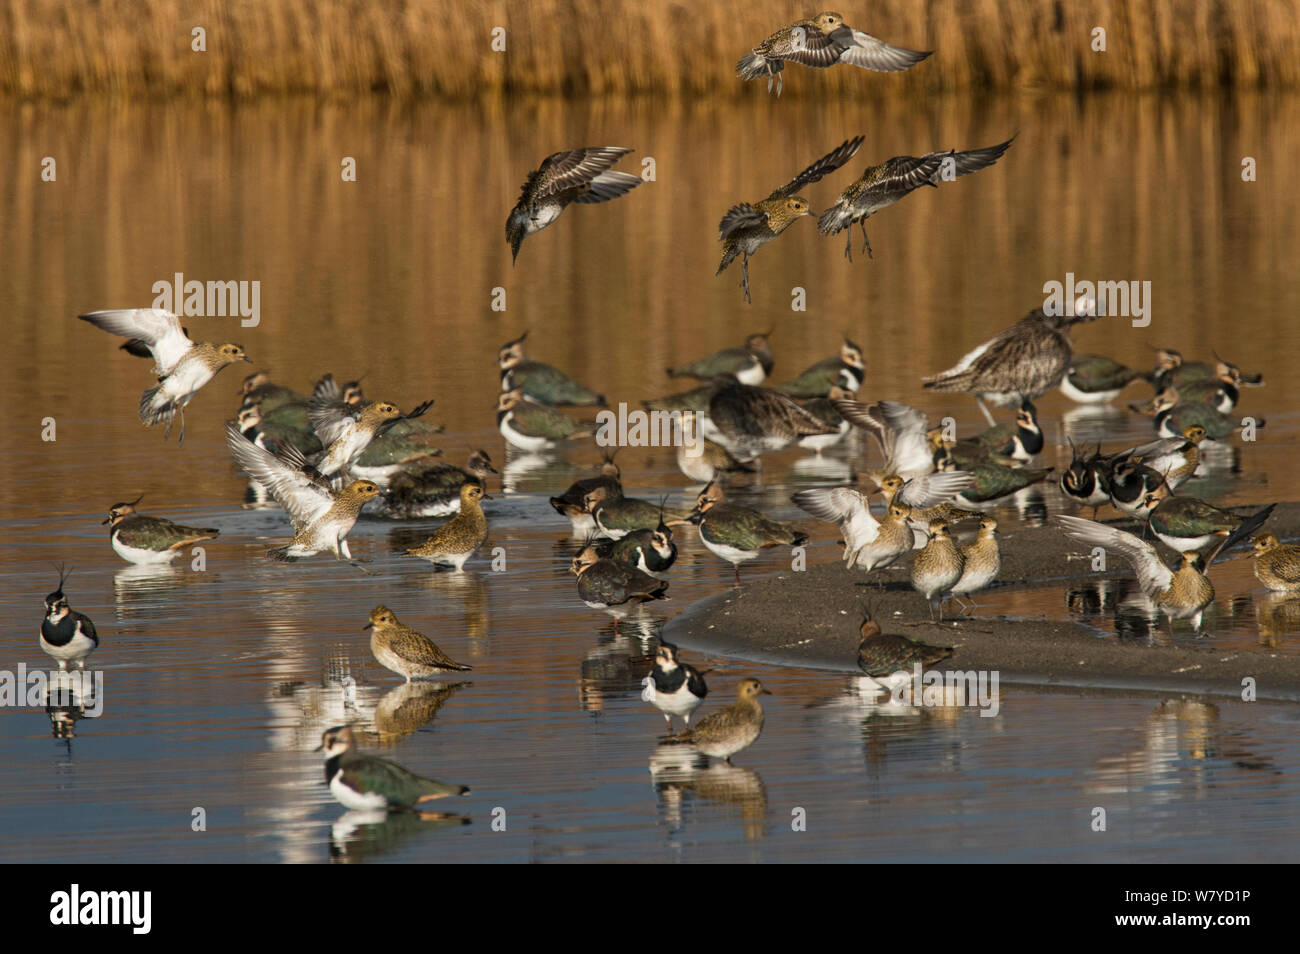 Migrating flock of Golden plover (Pluvialis apricaria) landing amongst a group of Northern Lapwings (Vanellus vanellus). Cresswell Pond, Northumberland, UK. November. Stock Photo